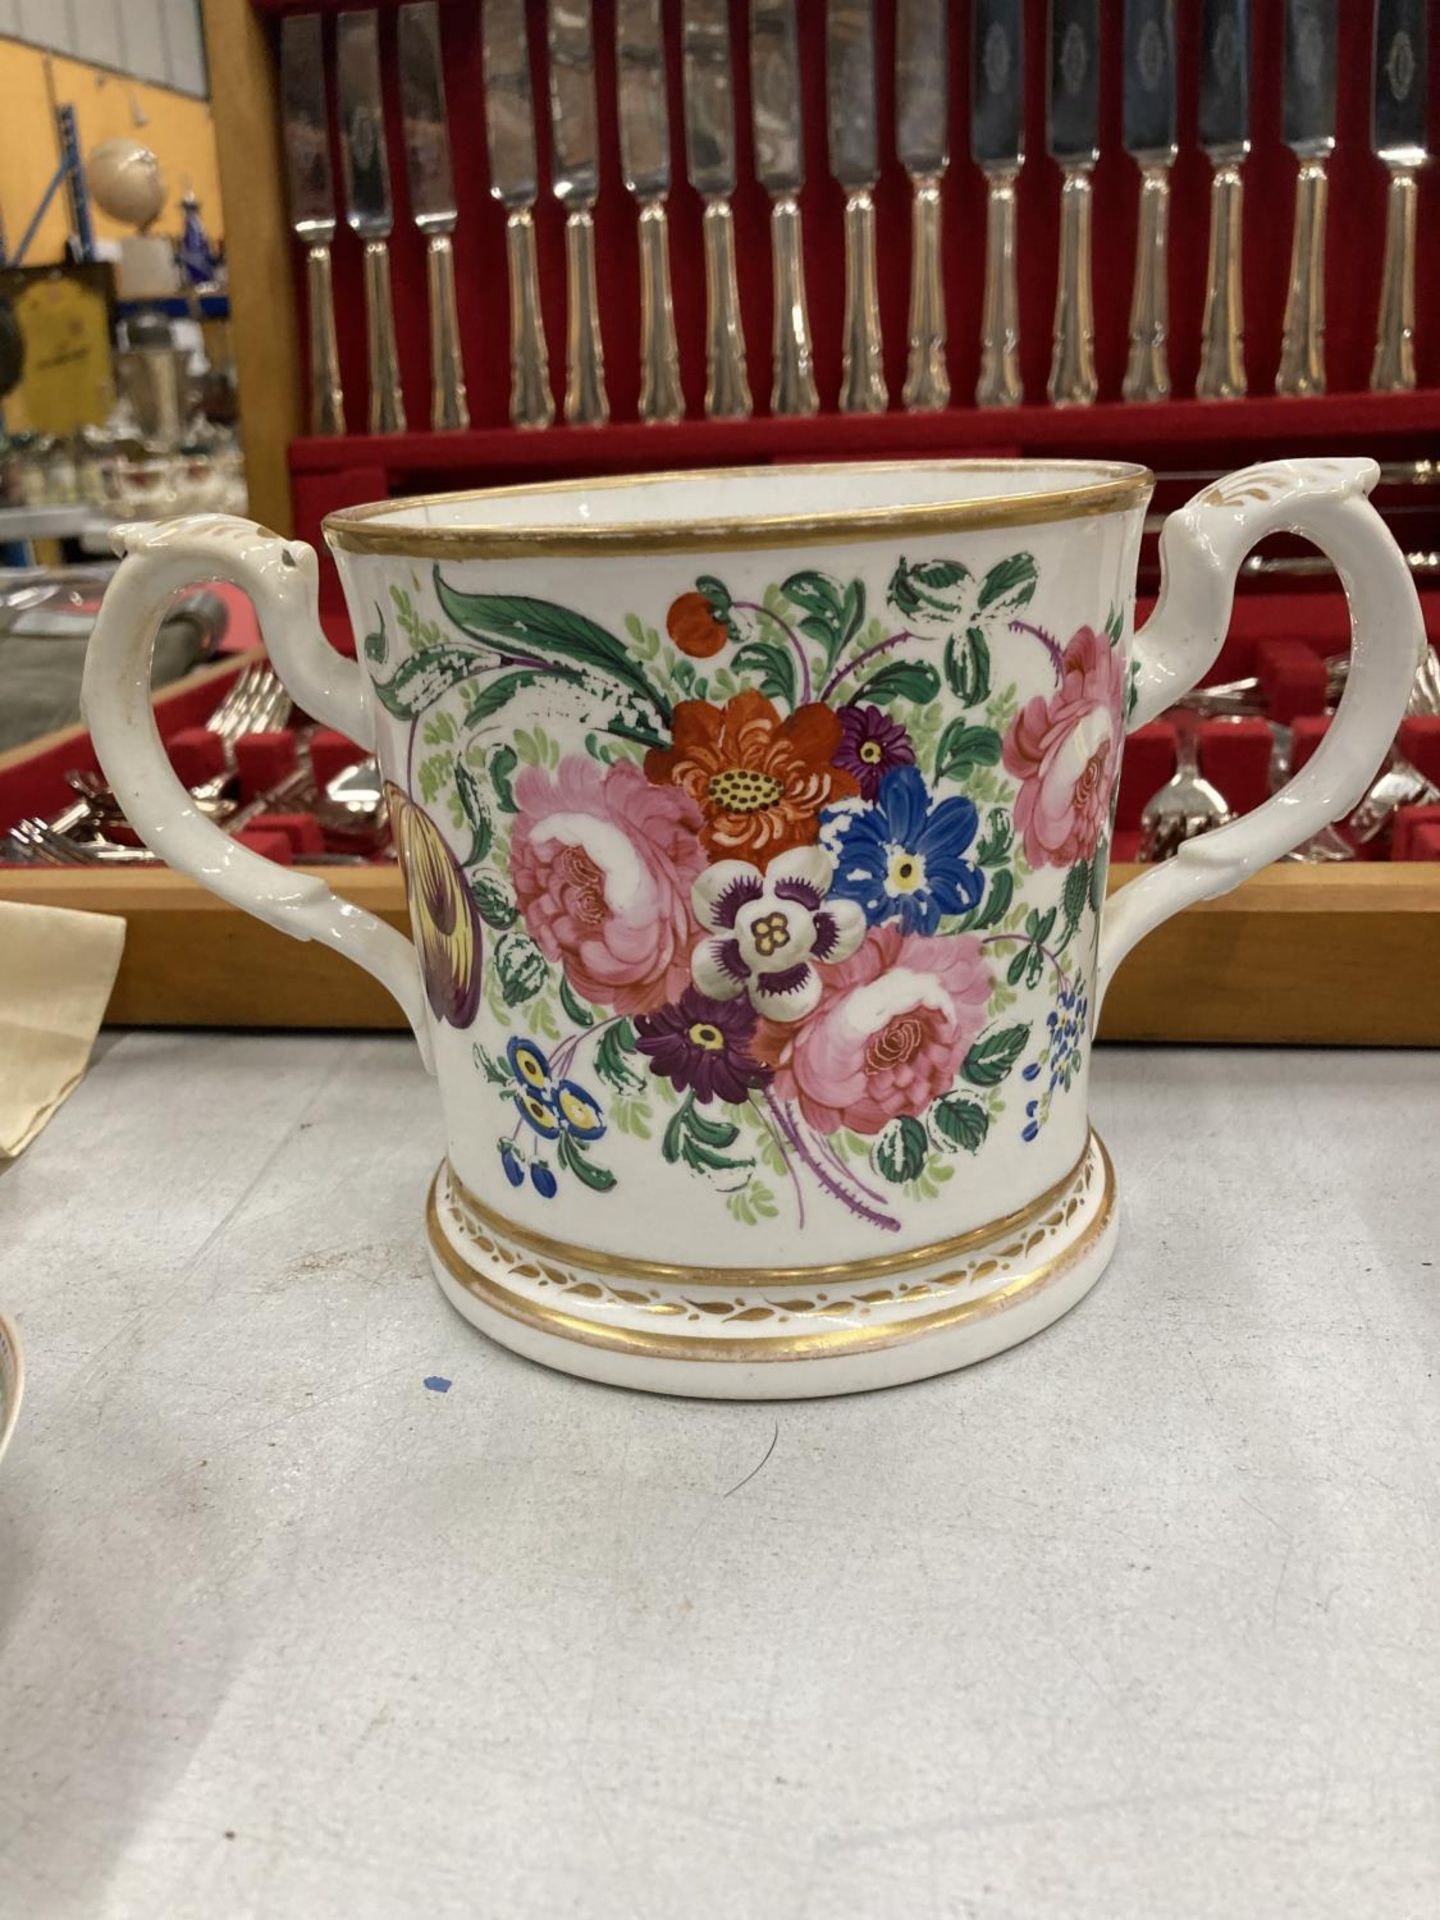 A CIRCA 1825 STAFFORDSHIRE SMALL MUG, OLD WORCESTER COFFEE CAN, A LARGE 19TH CENTURY LOVING CUP - - Image 3 of 3